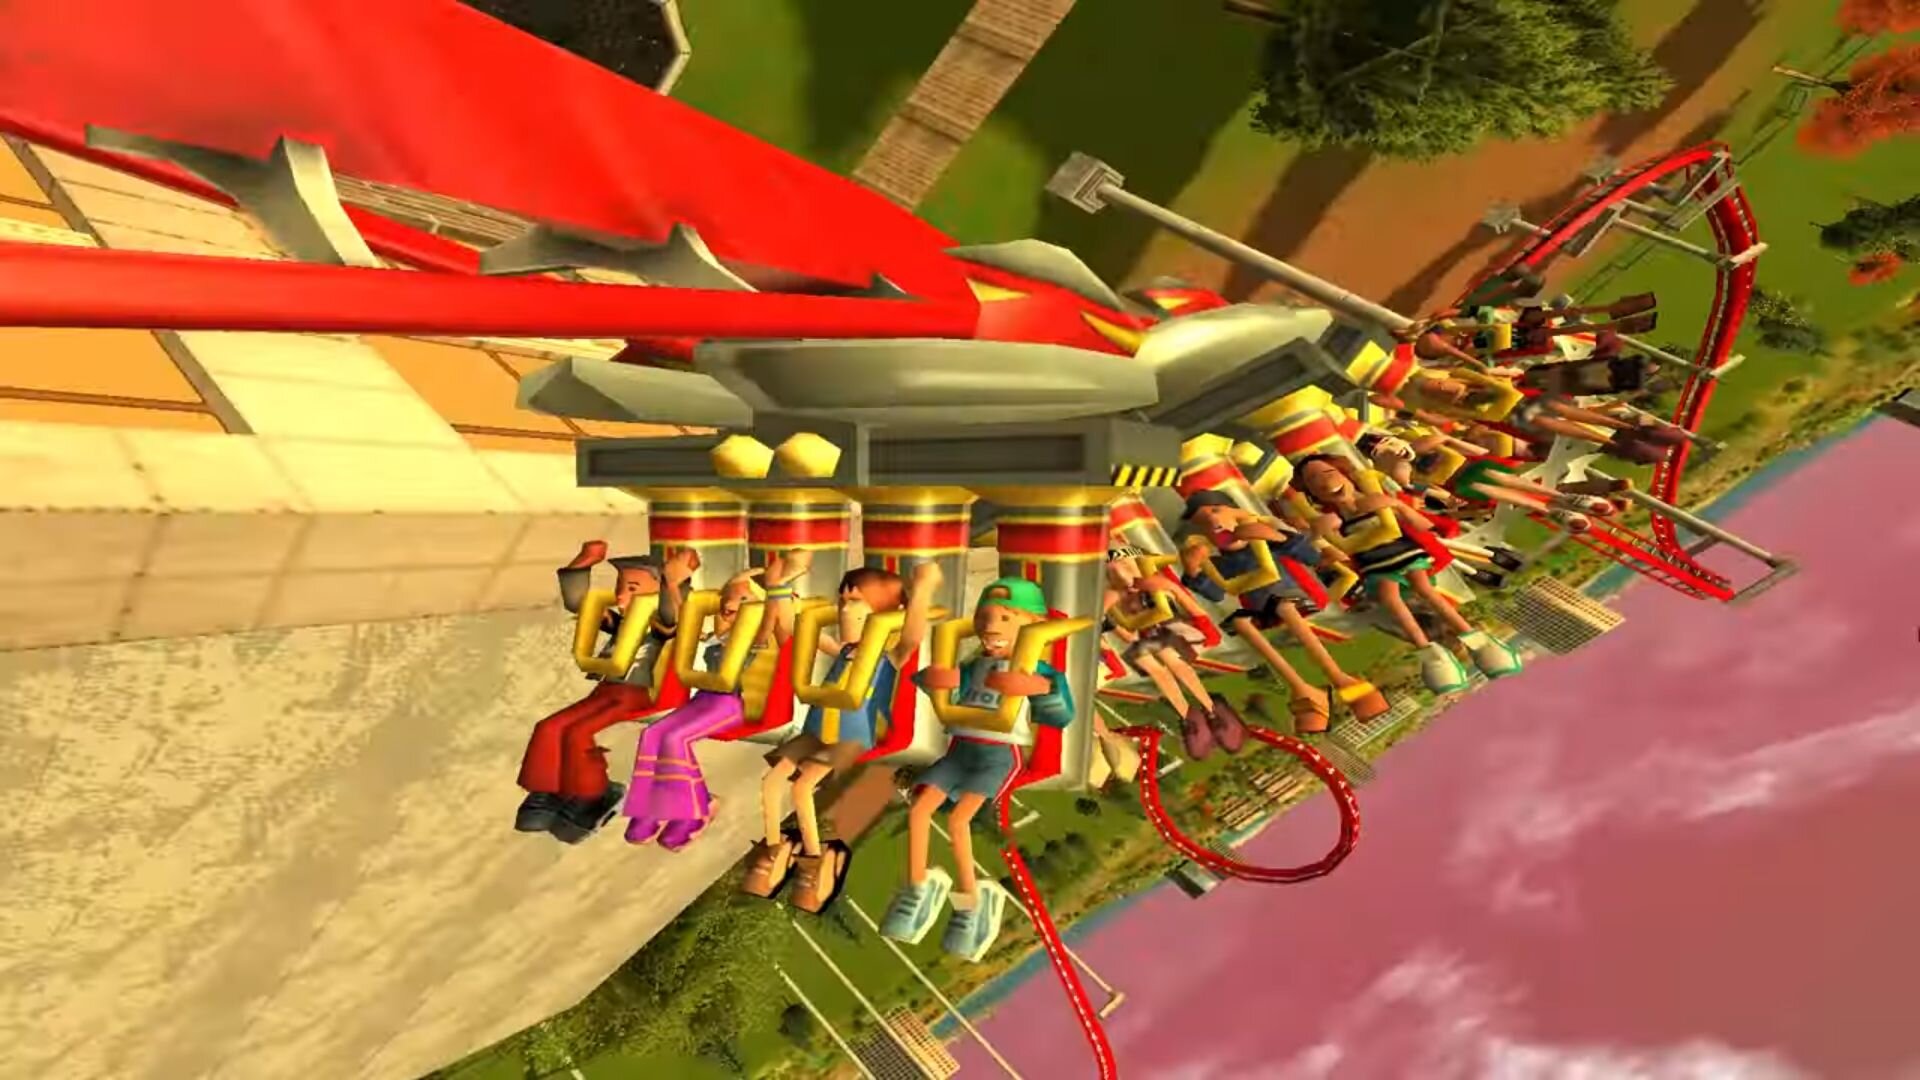 Roller Coaster Tycoon 3 Complete Edition Review 